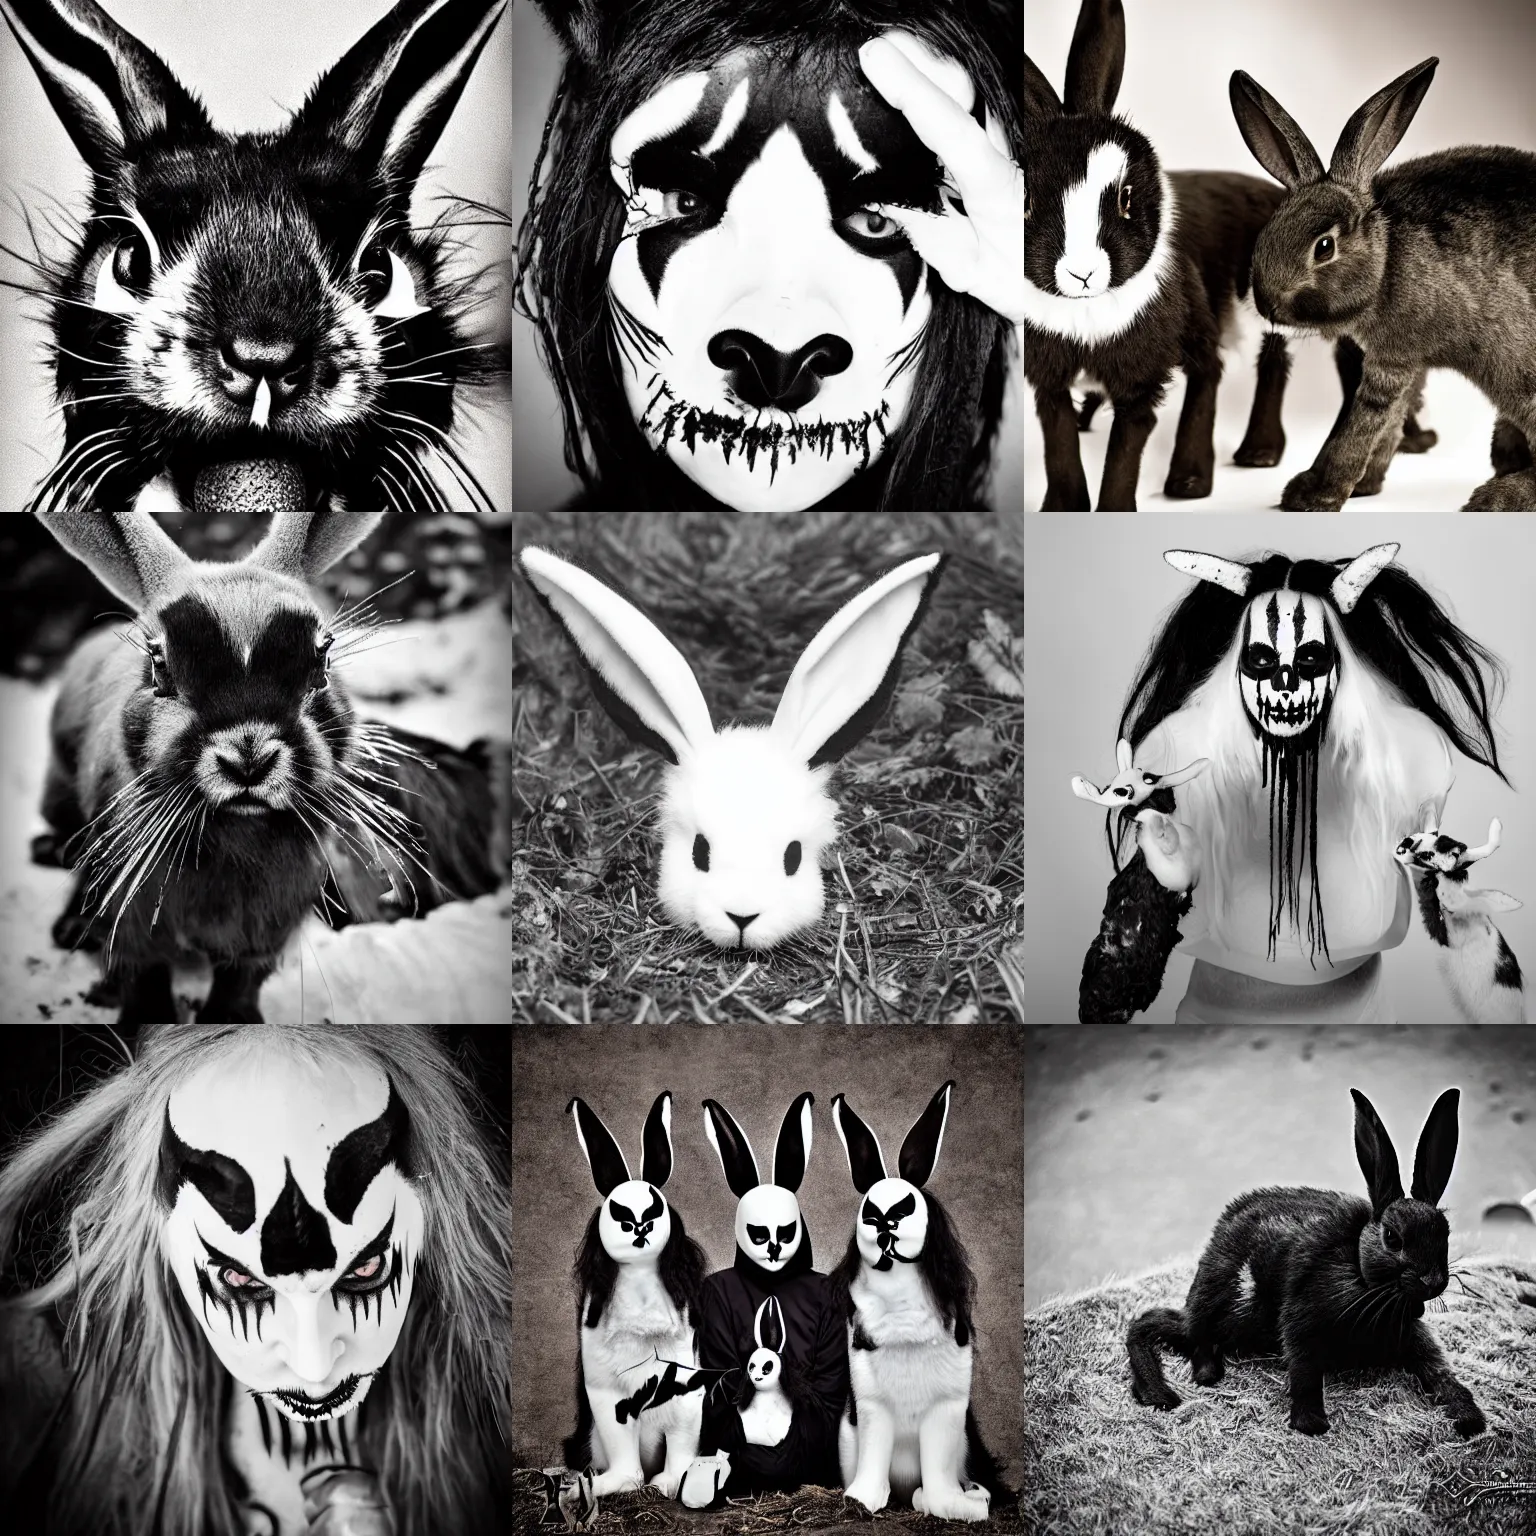 black metal bunnies with corpse paint, animal